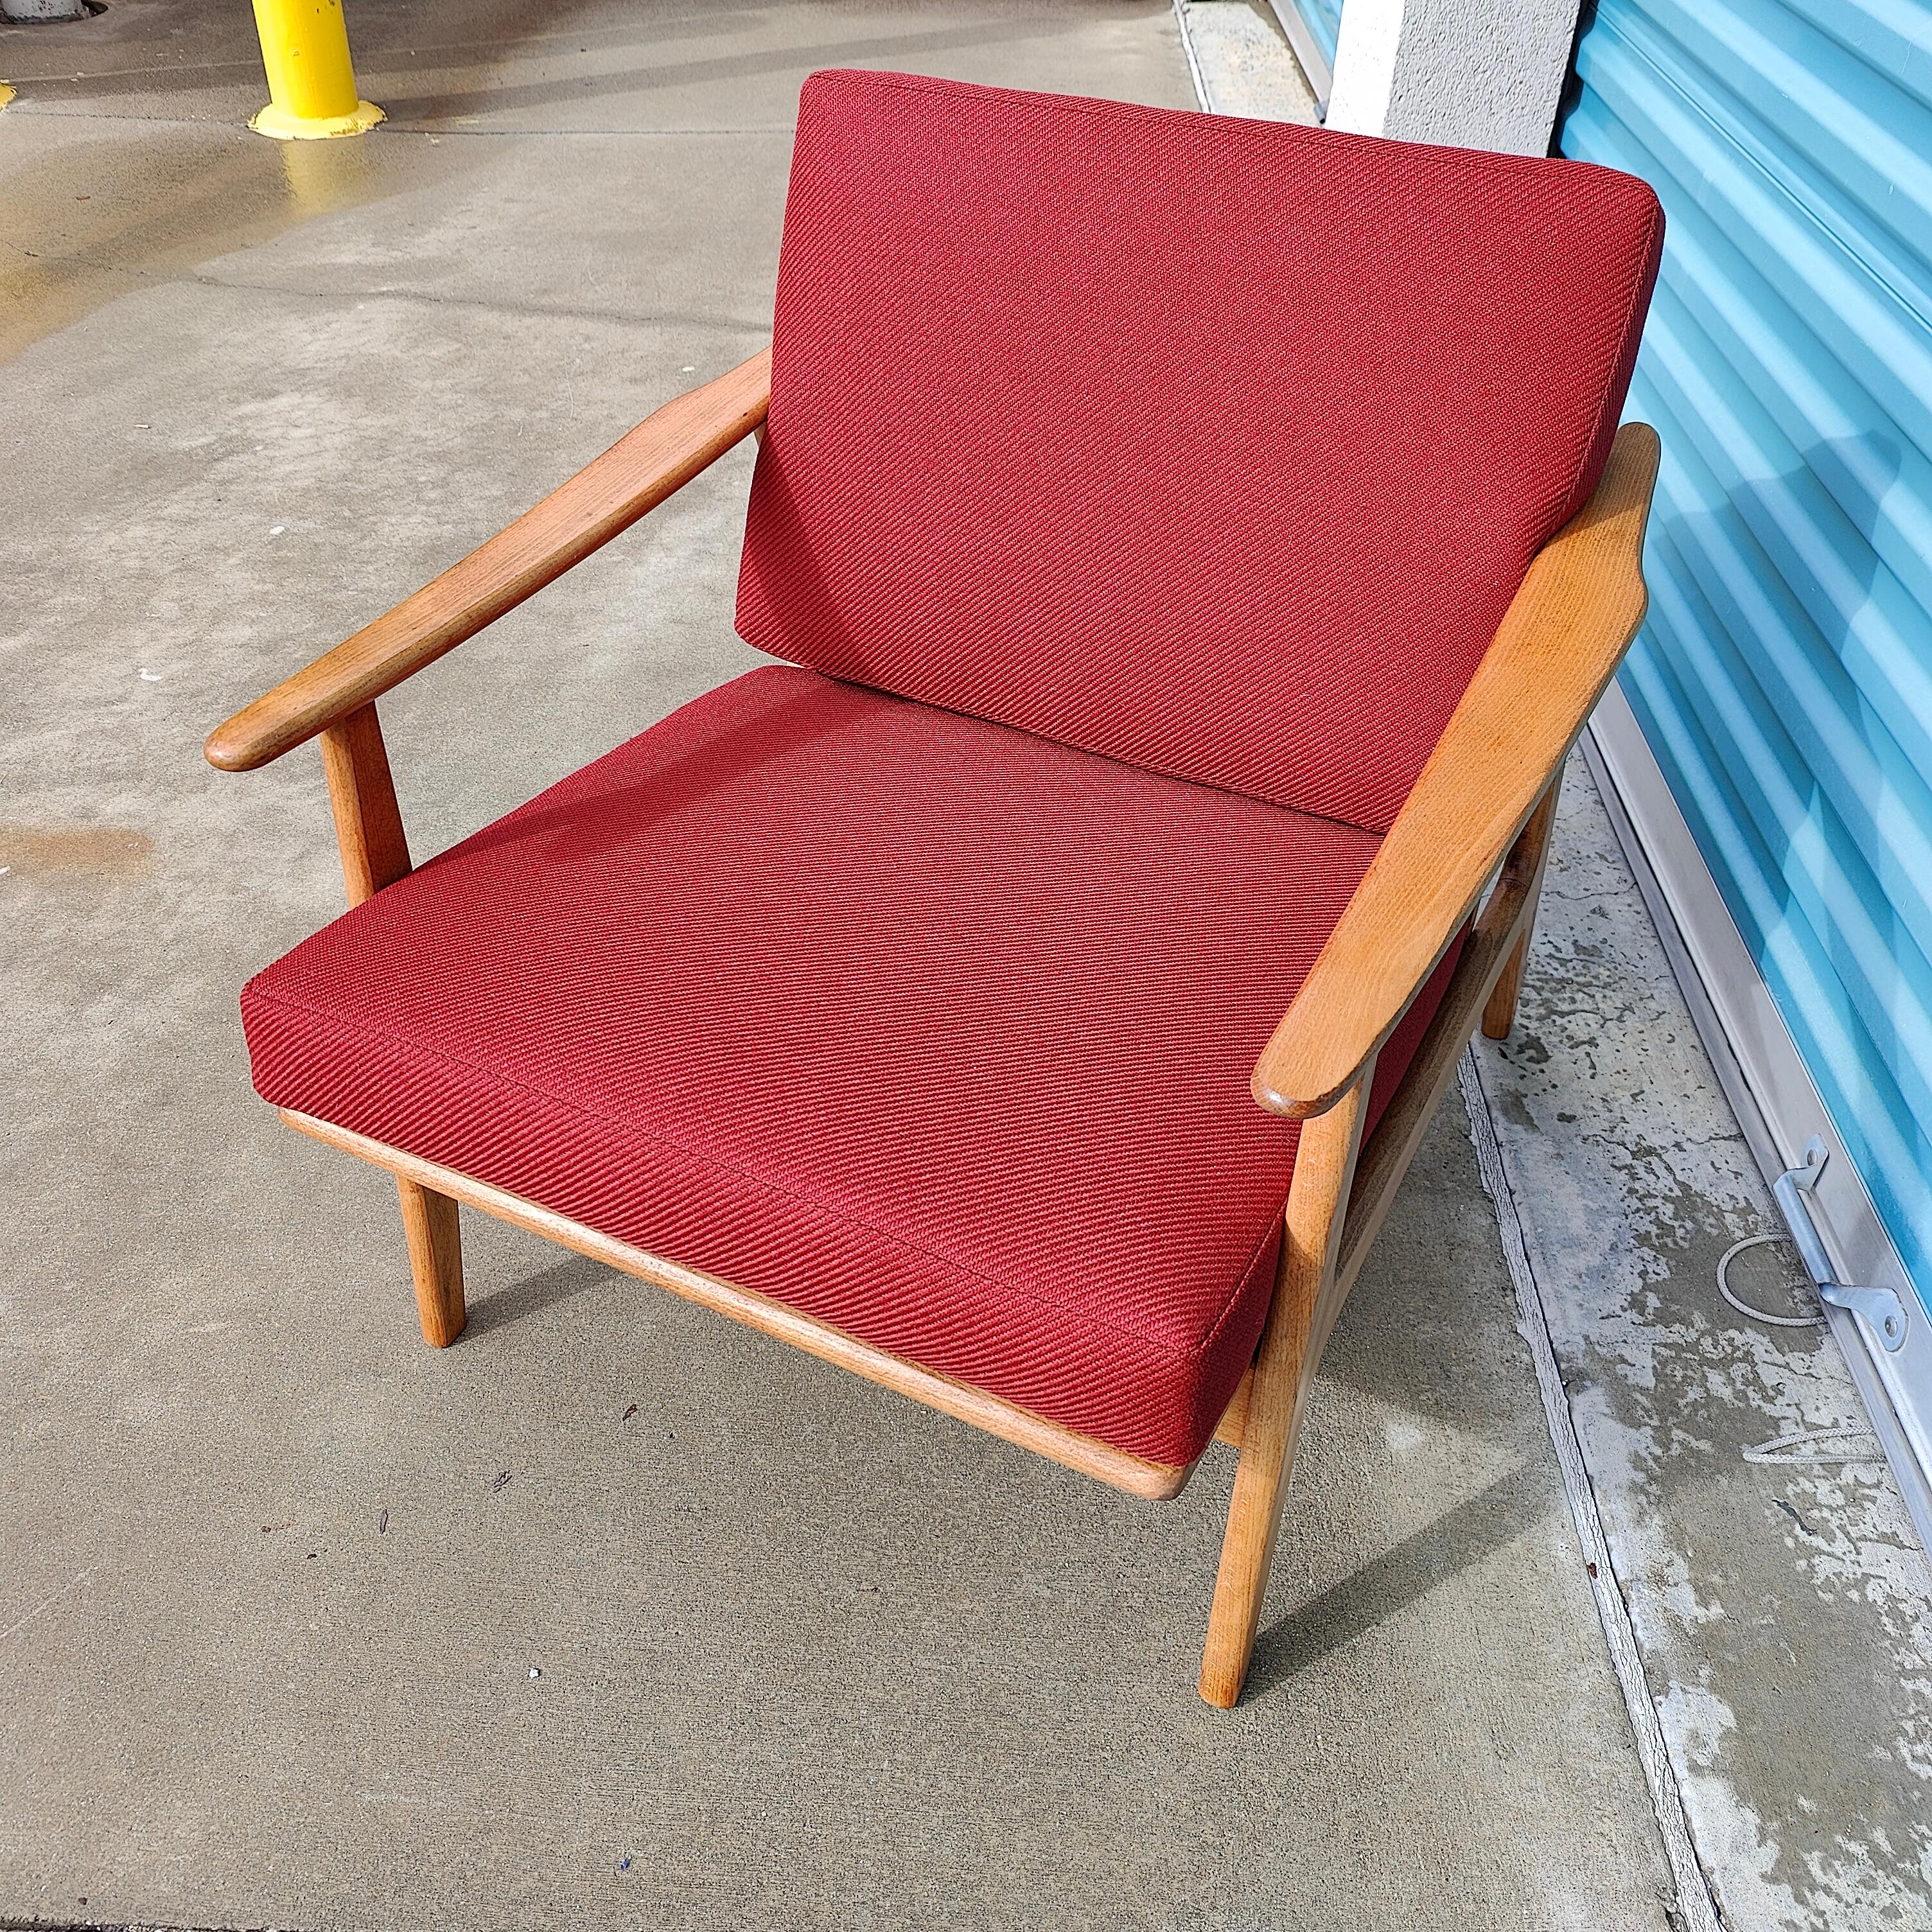 Vintage Mid-Century Modern Yugoslavian Lounge Chair In Excellent Condition For Sale In Chino Hills, CA